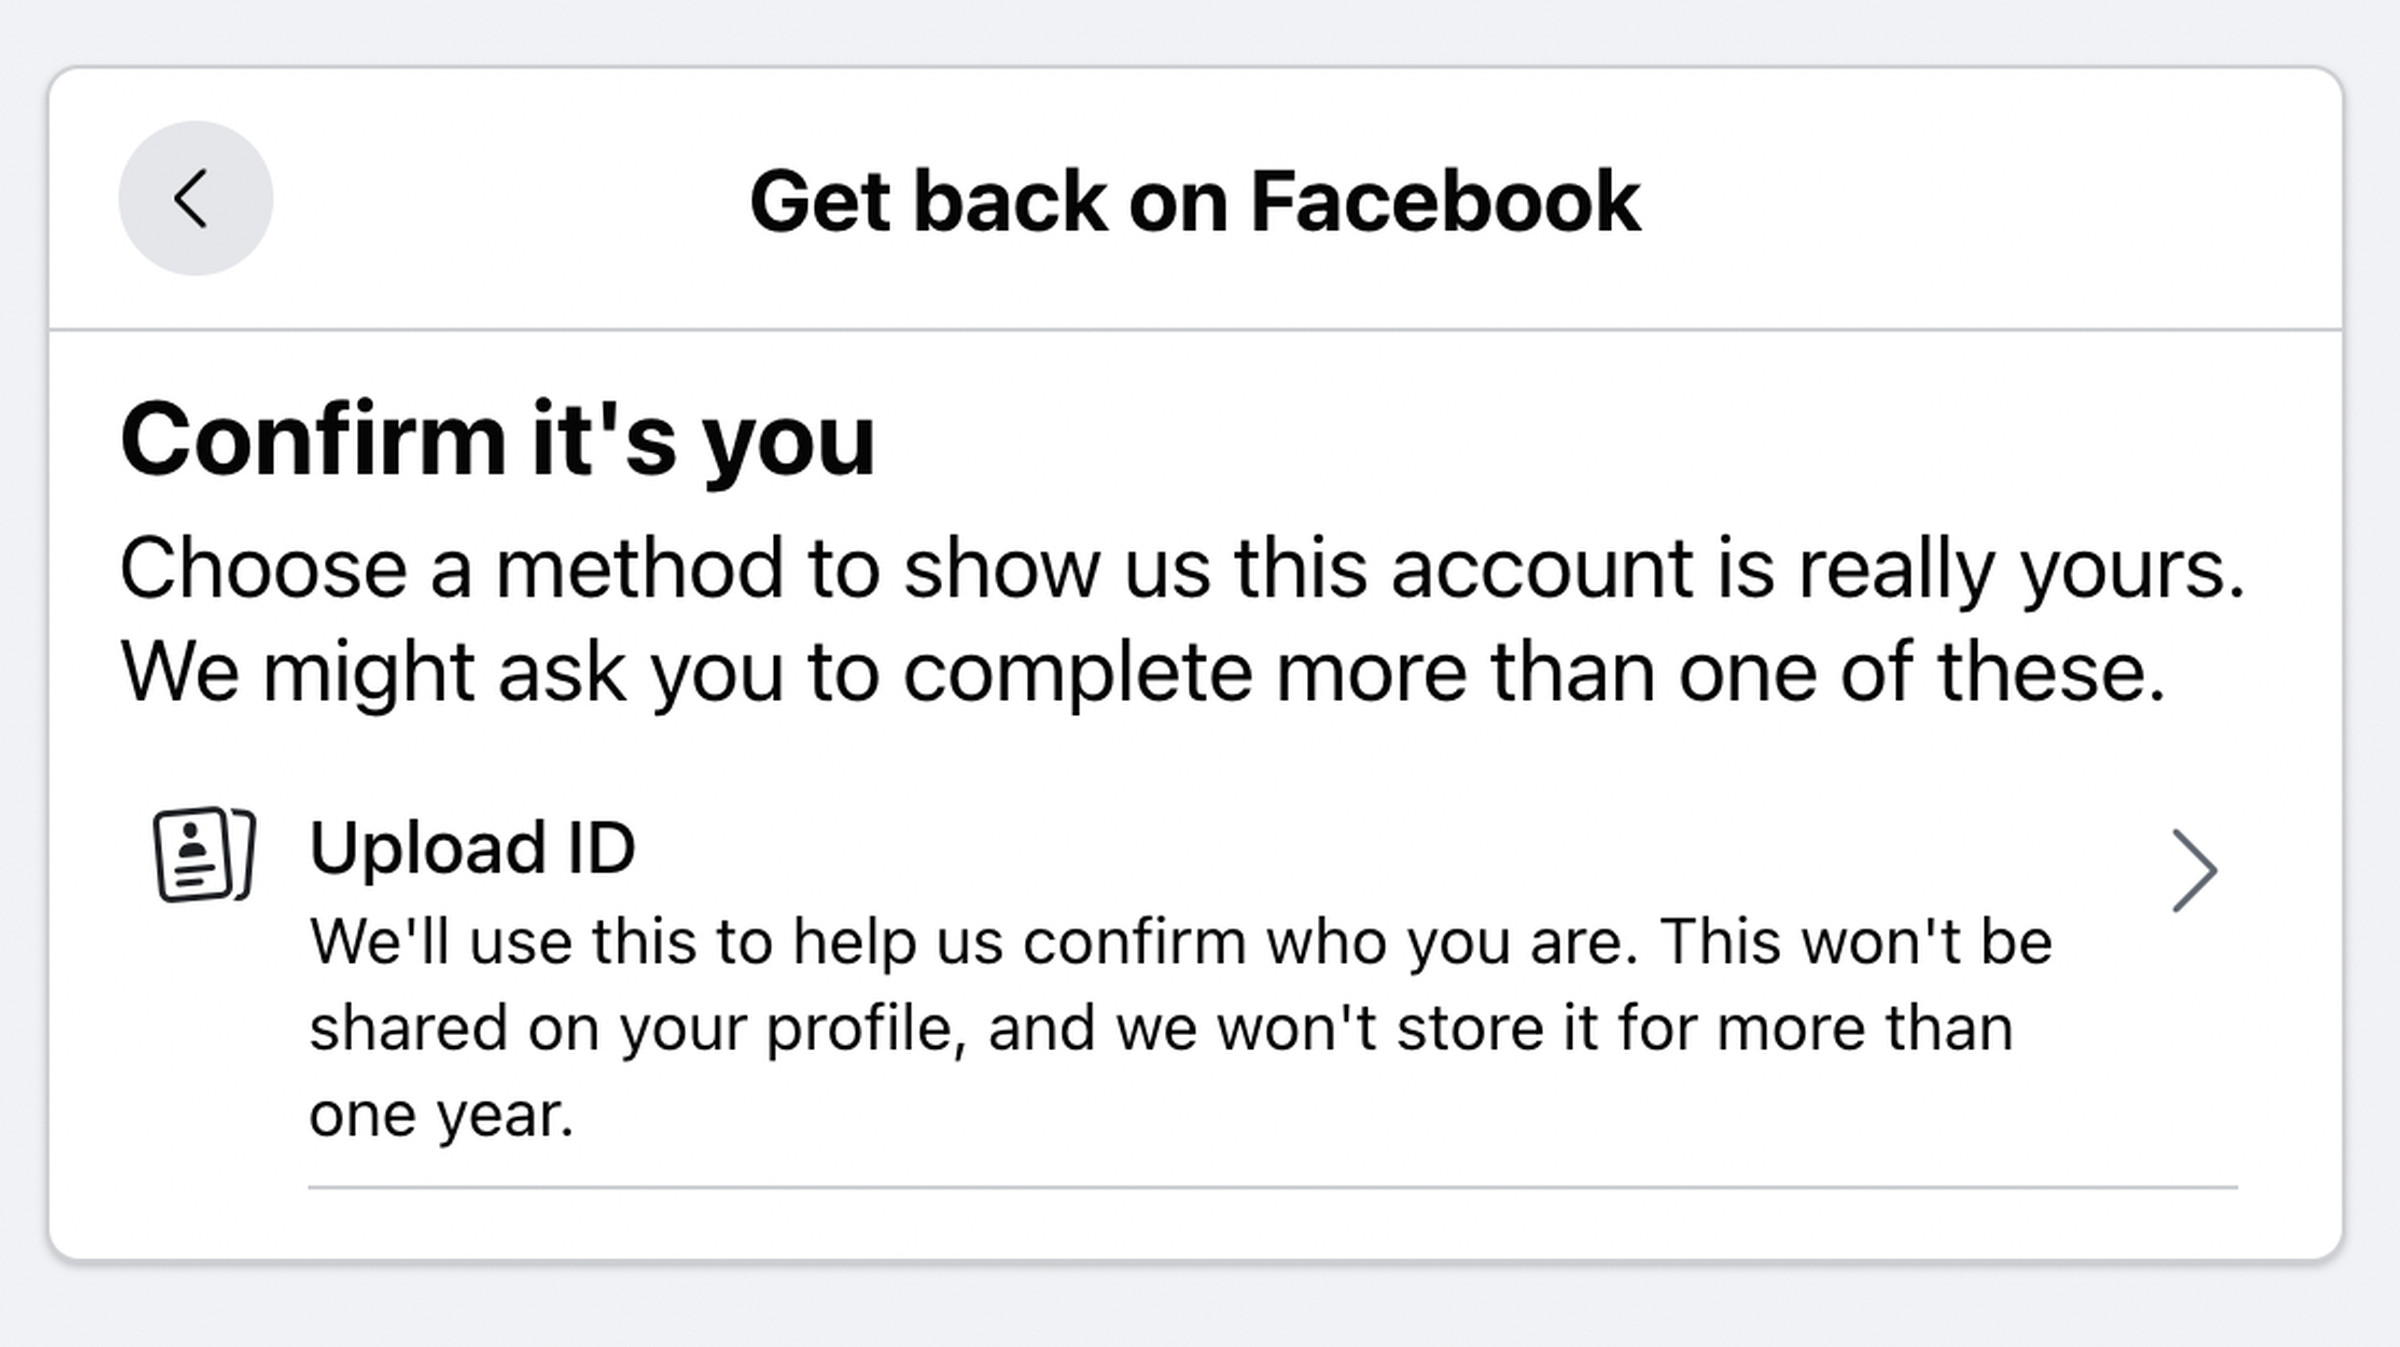 If the account is fully locked, Facebook will ask for a photo ID in order to regain control.